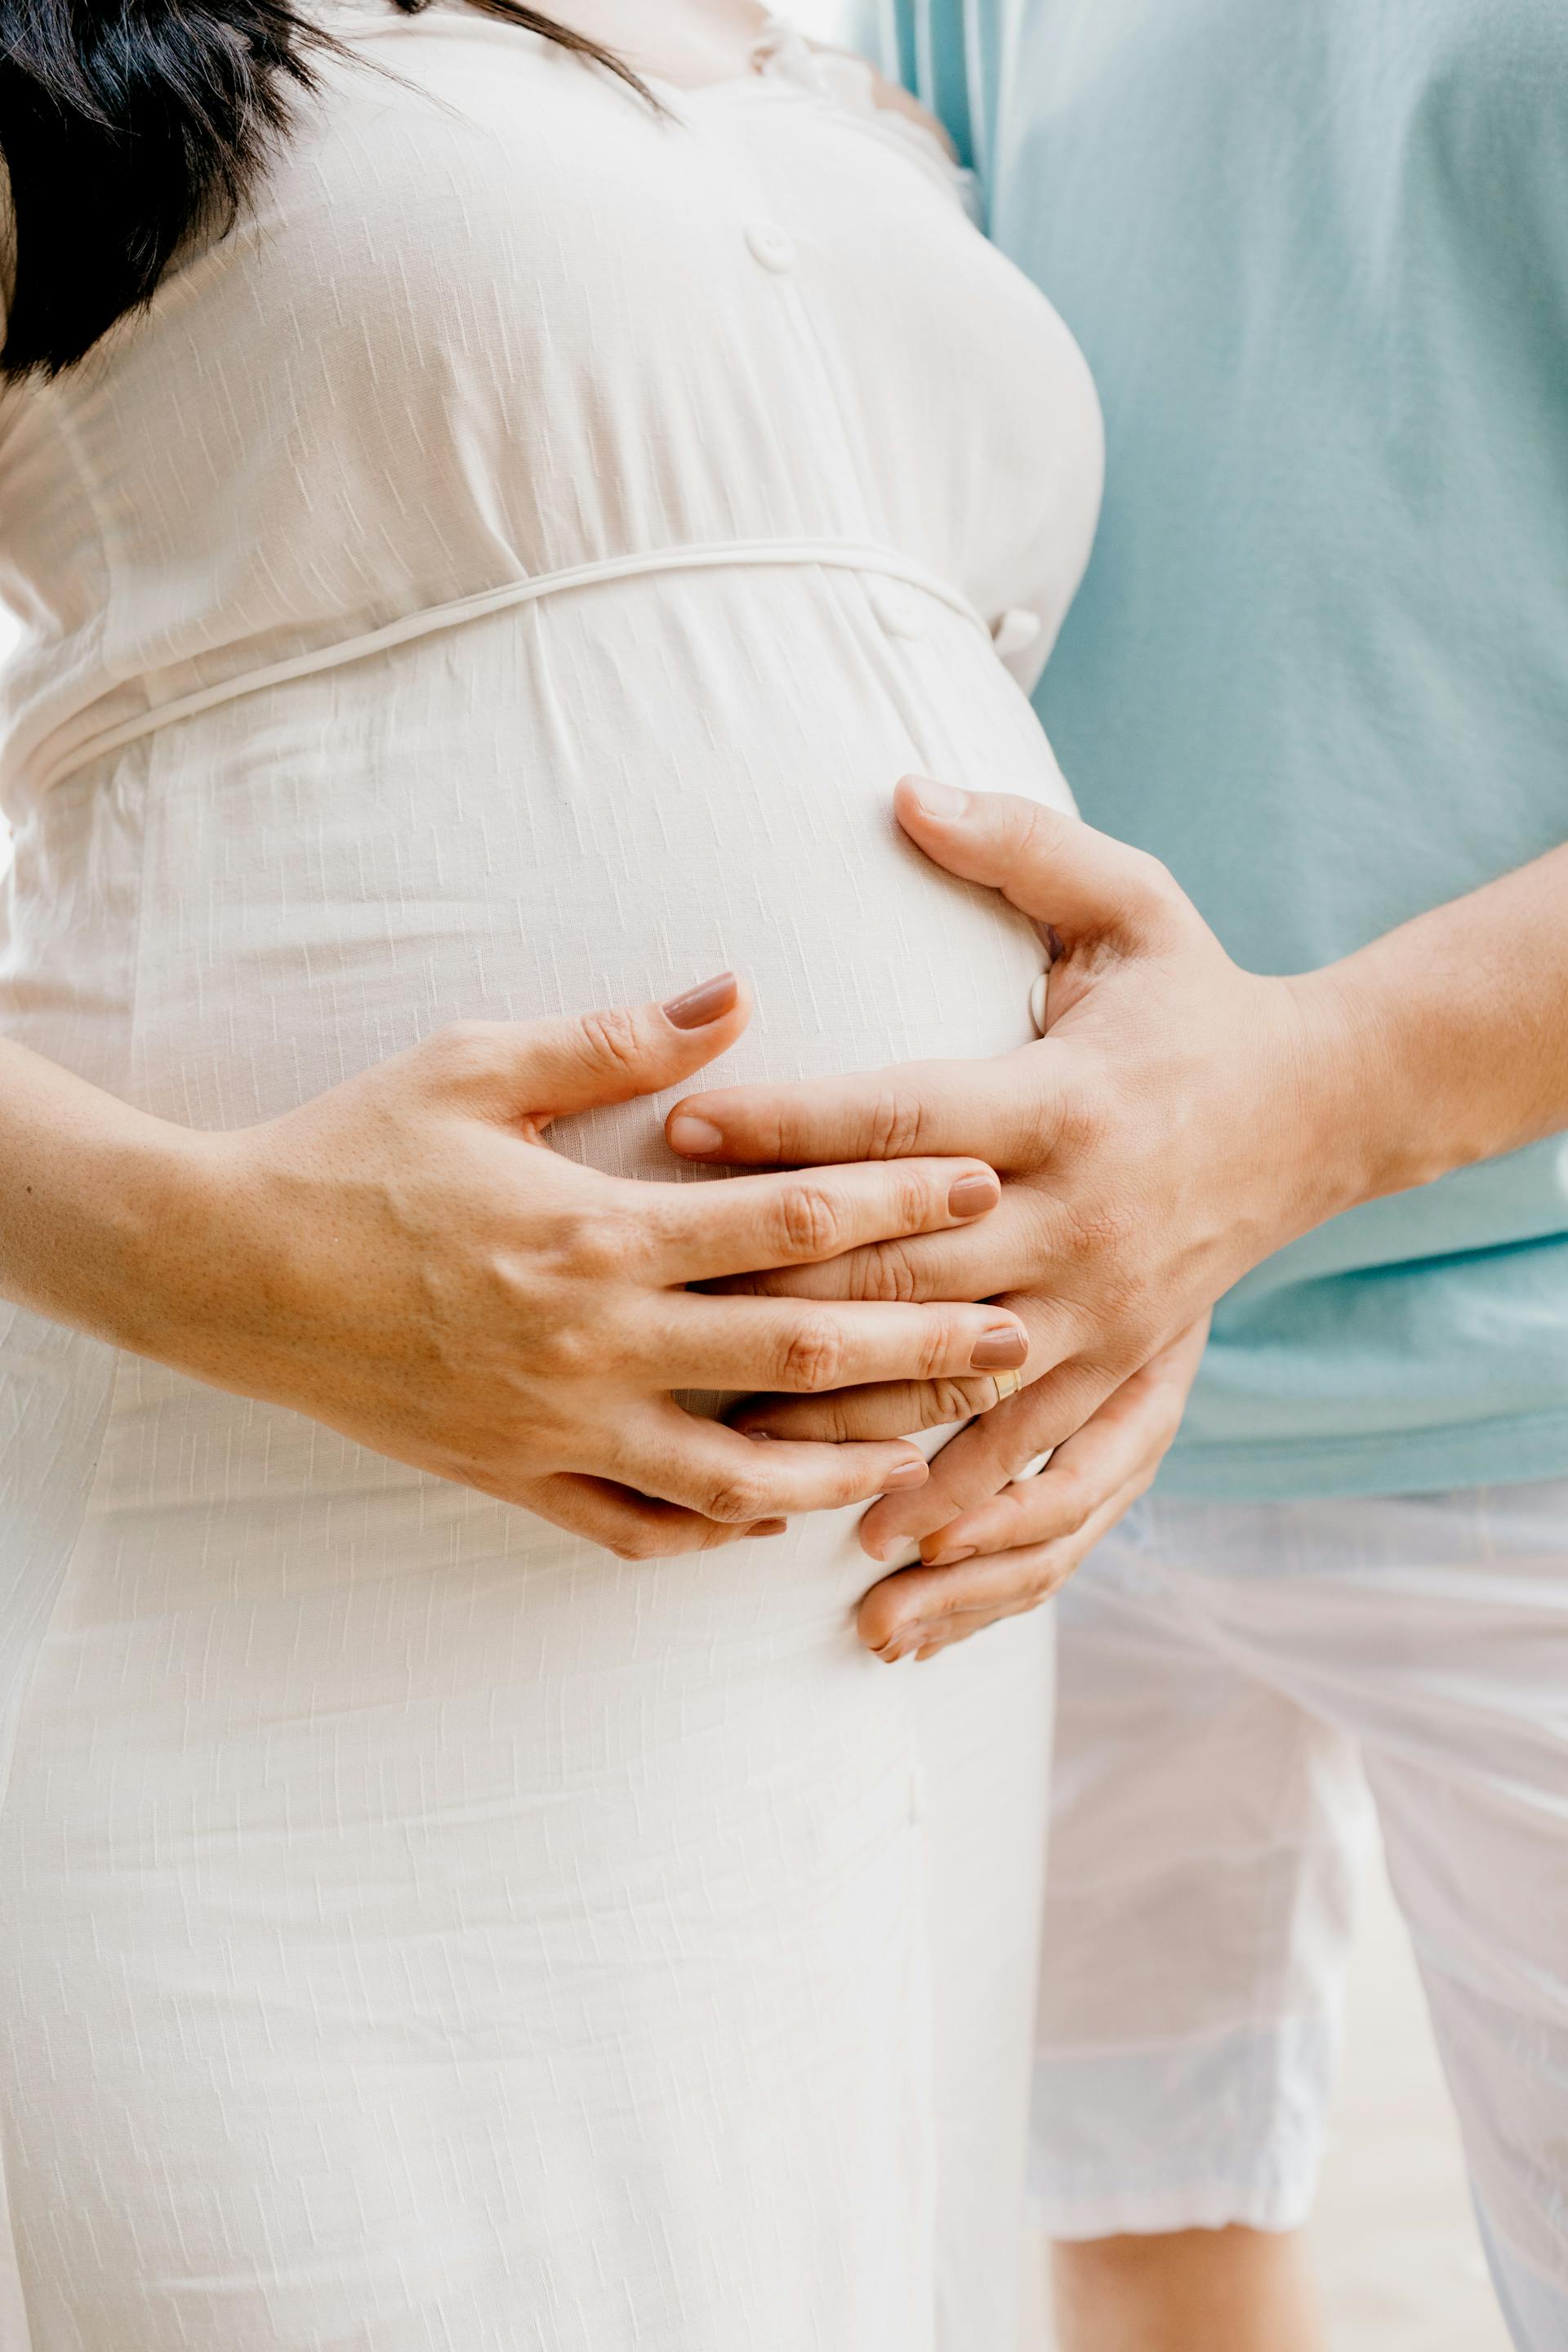 A couple holding a pregnant belly | Source: Pexels